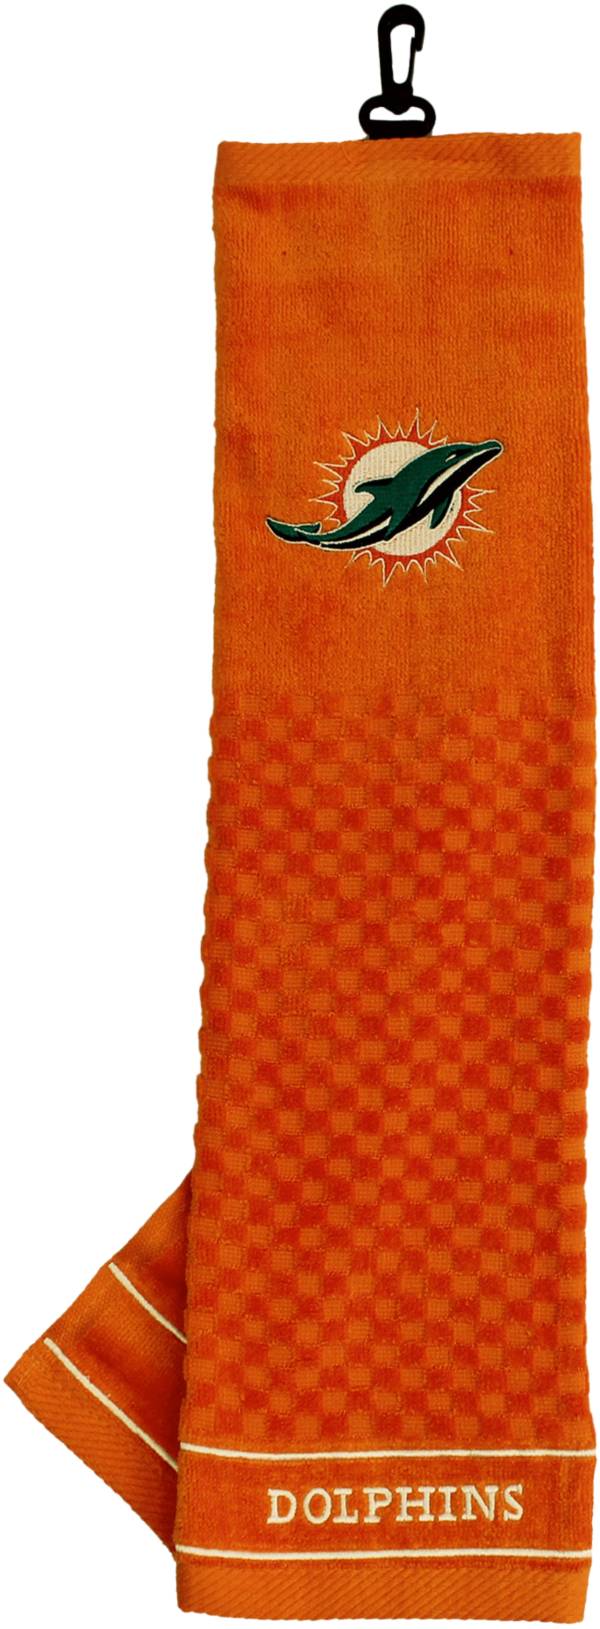 Team Golf Miami Dolphins Embroidered Towel product image